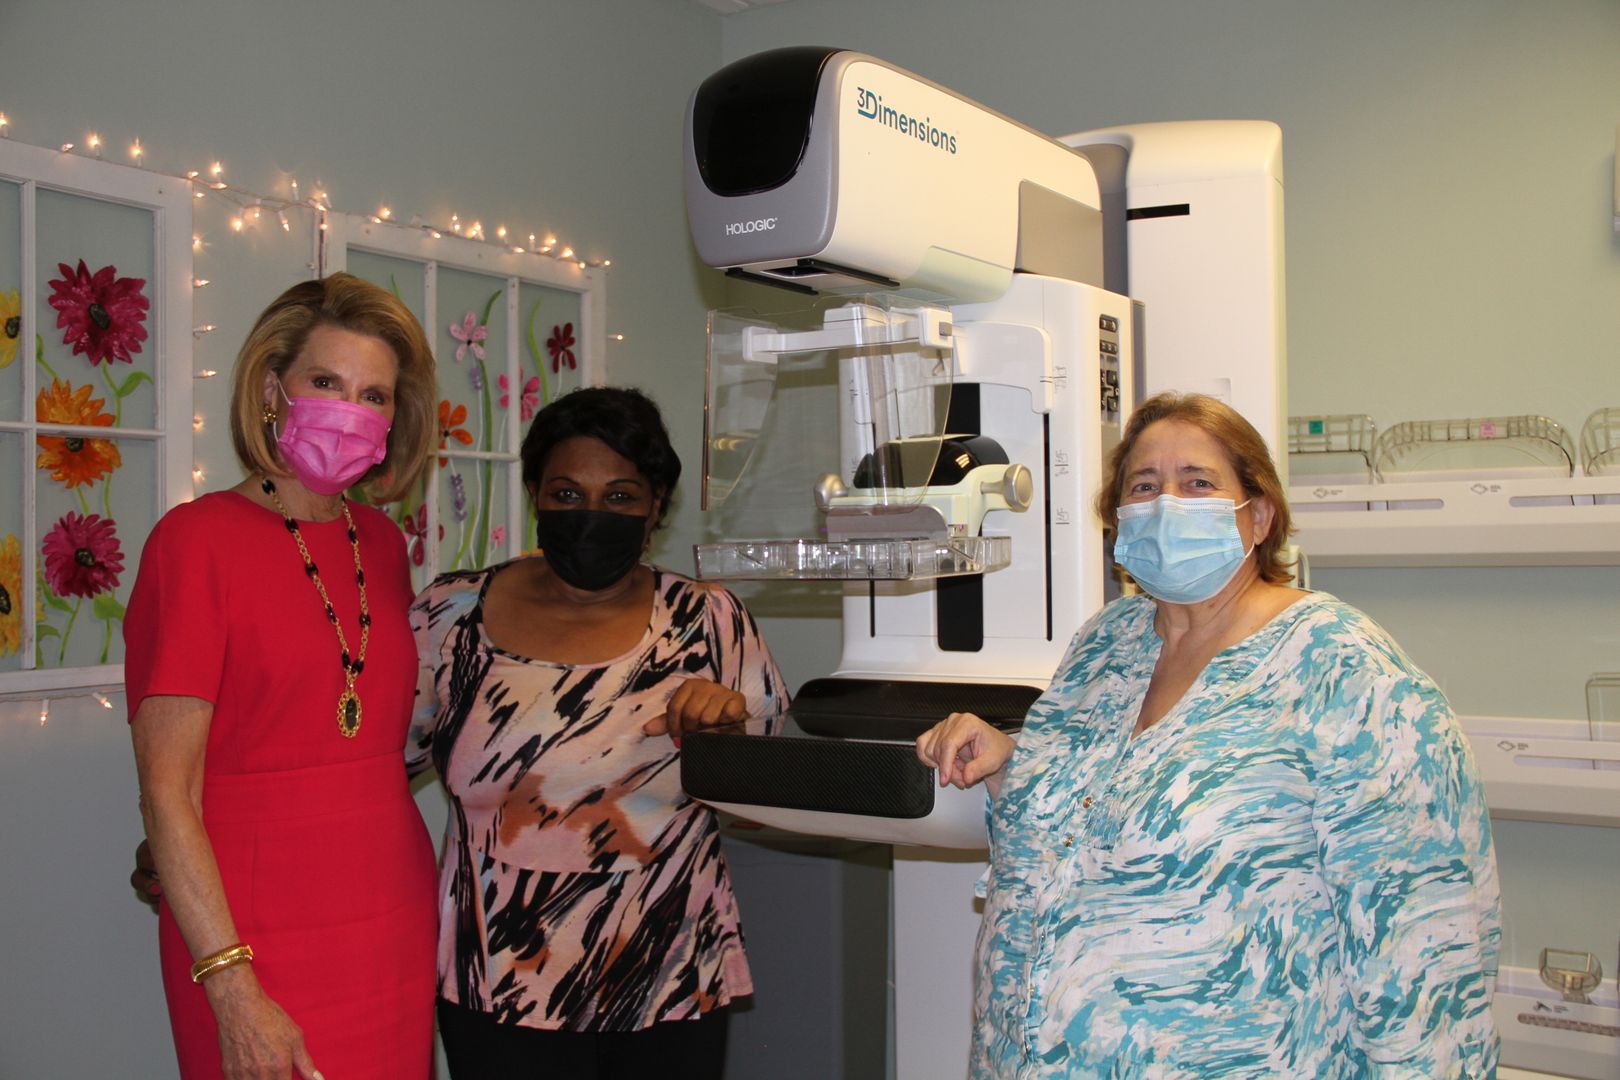 Three women wearing masks standing next to a "3Dimensions" medical machine in a room with floral decorations.